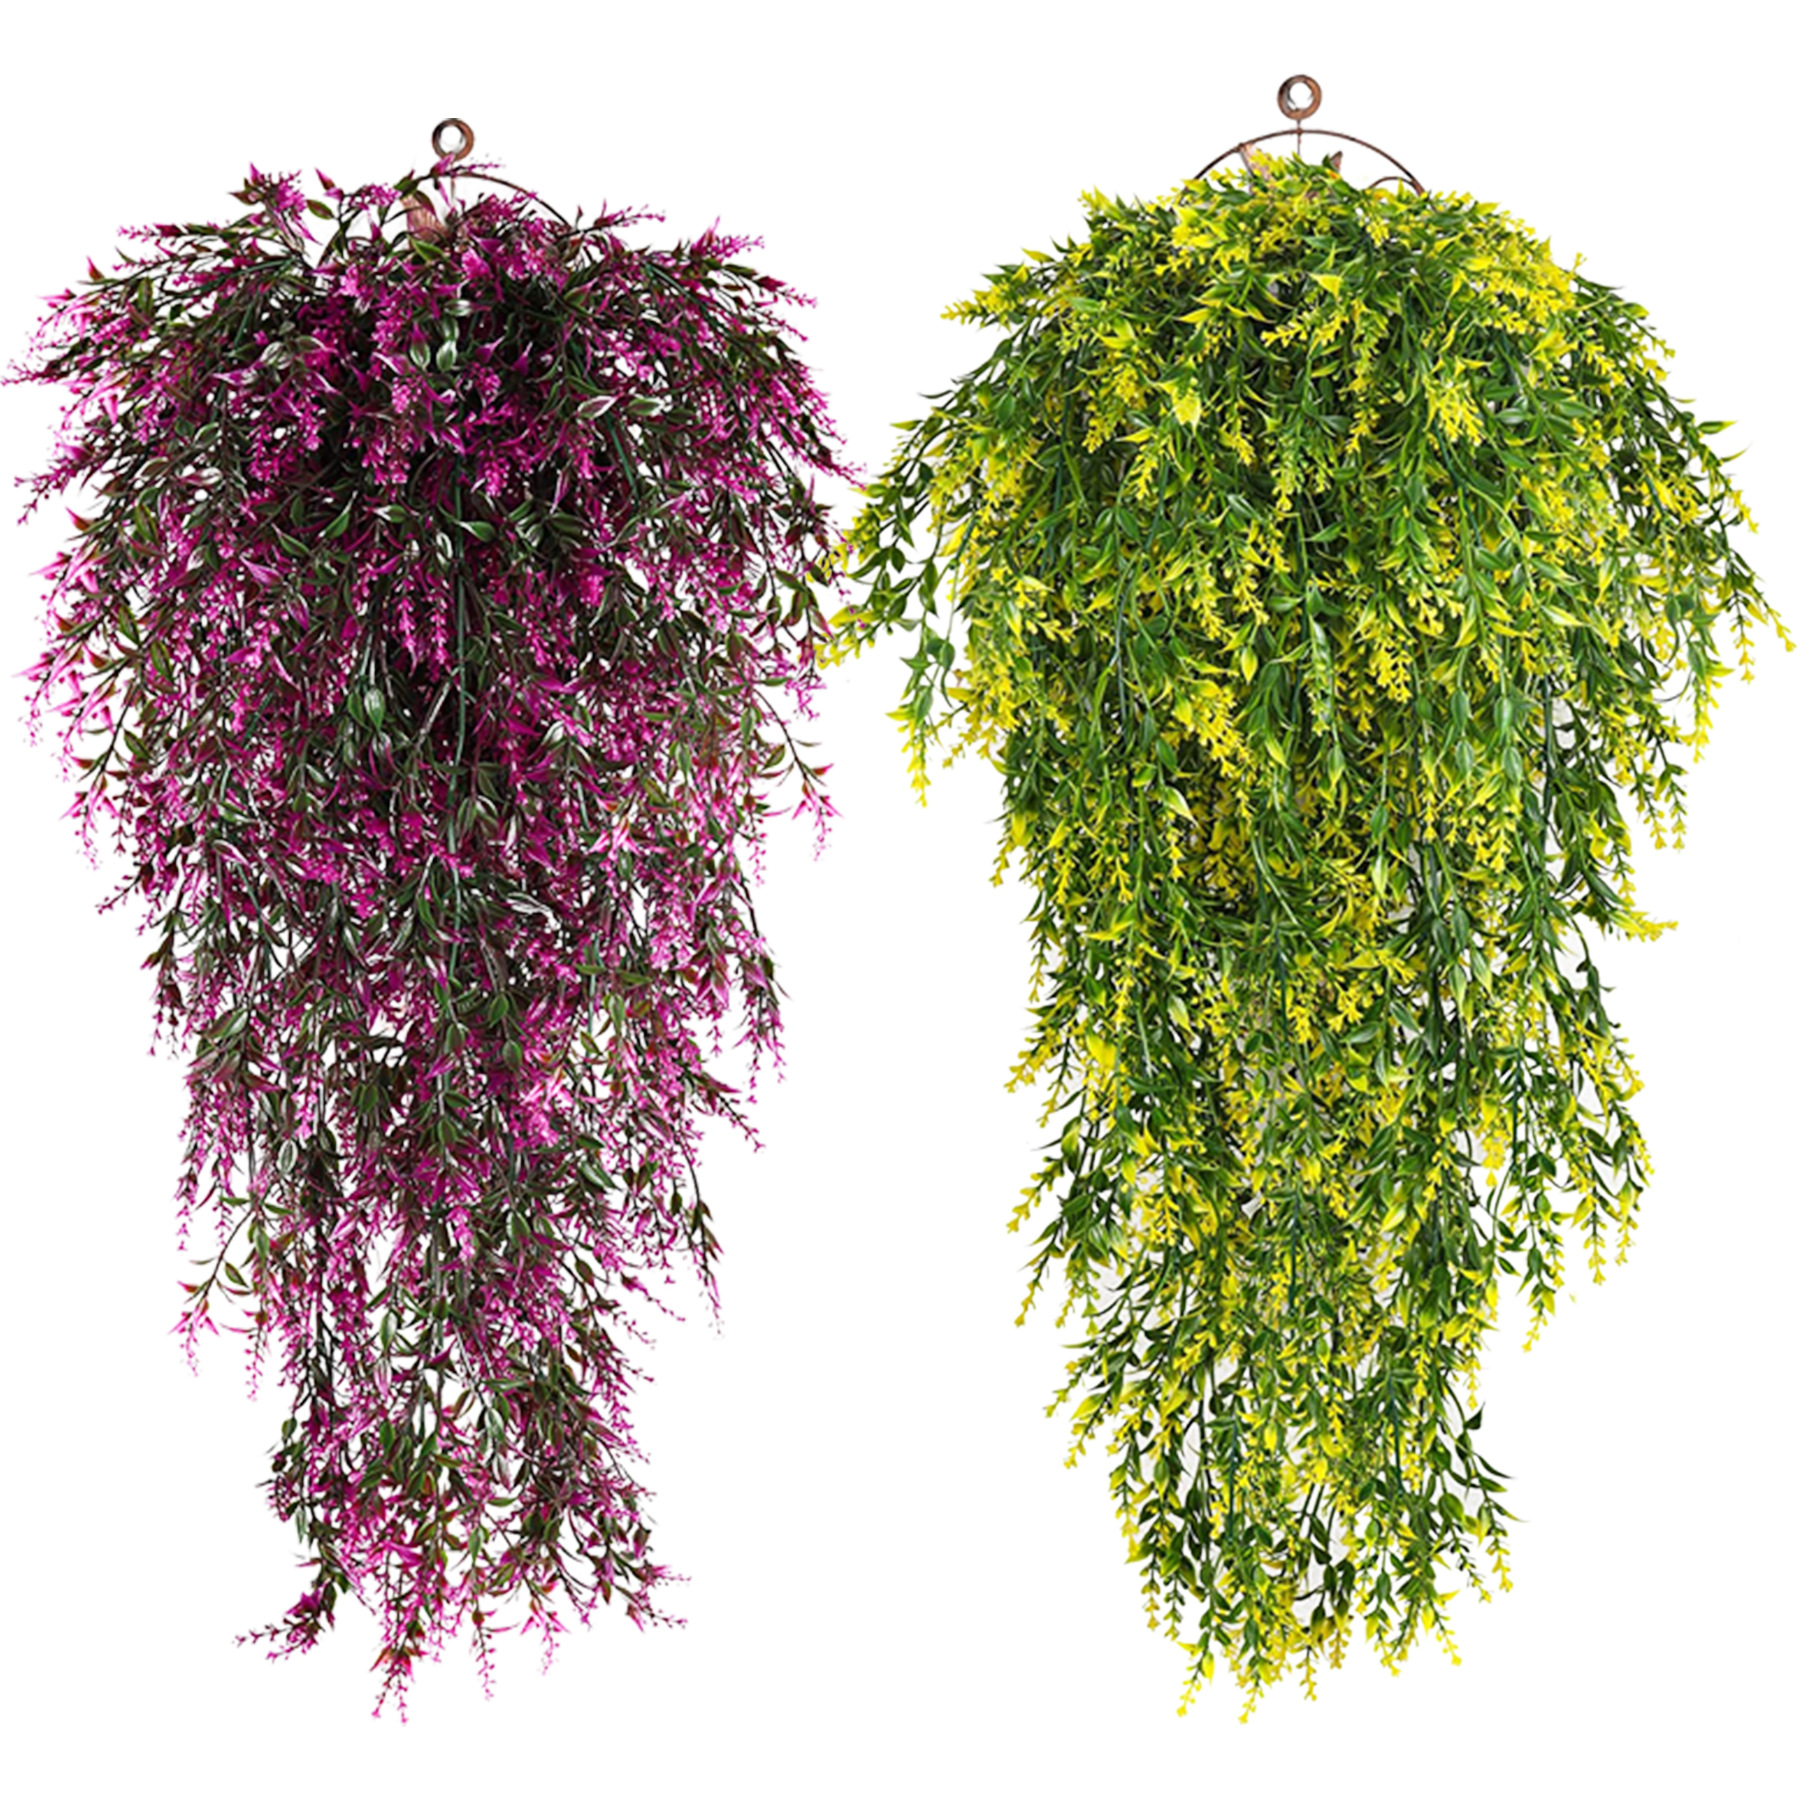 Wholesale Artificial Lavender Wall Hanging Flower Decoration Emulational Plants and Flowers Rattan Balcony Wall Vine Green Plant Dress up